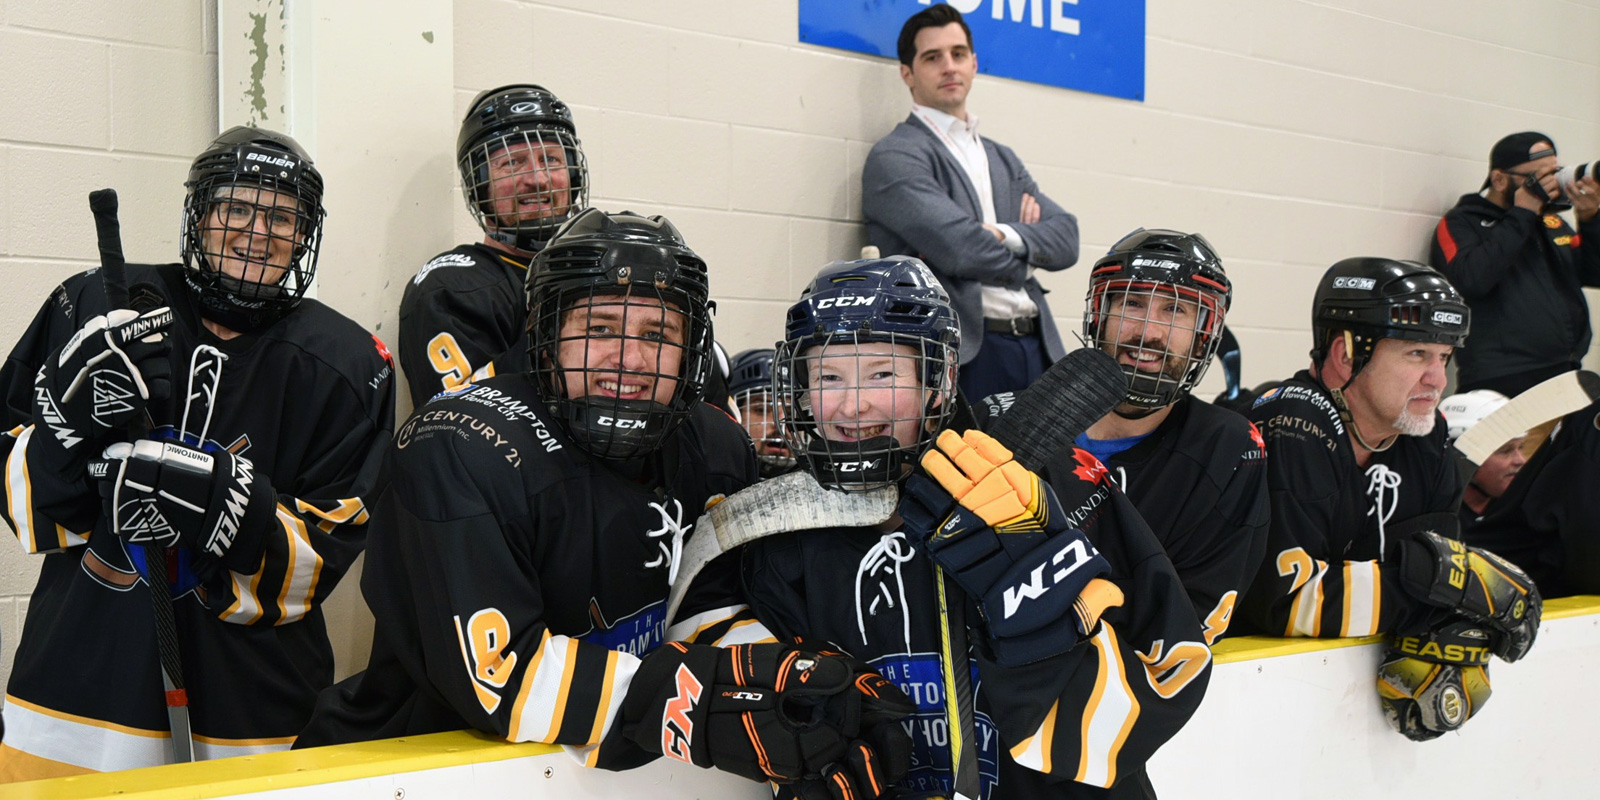 A team in balck jerseys pose in front of the bench with a coach in behind leaning against he brick wall